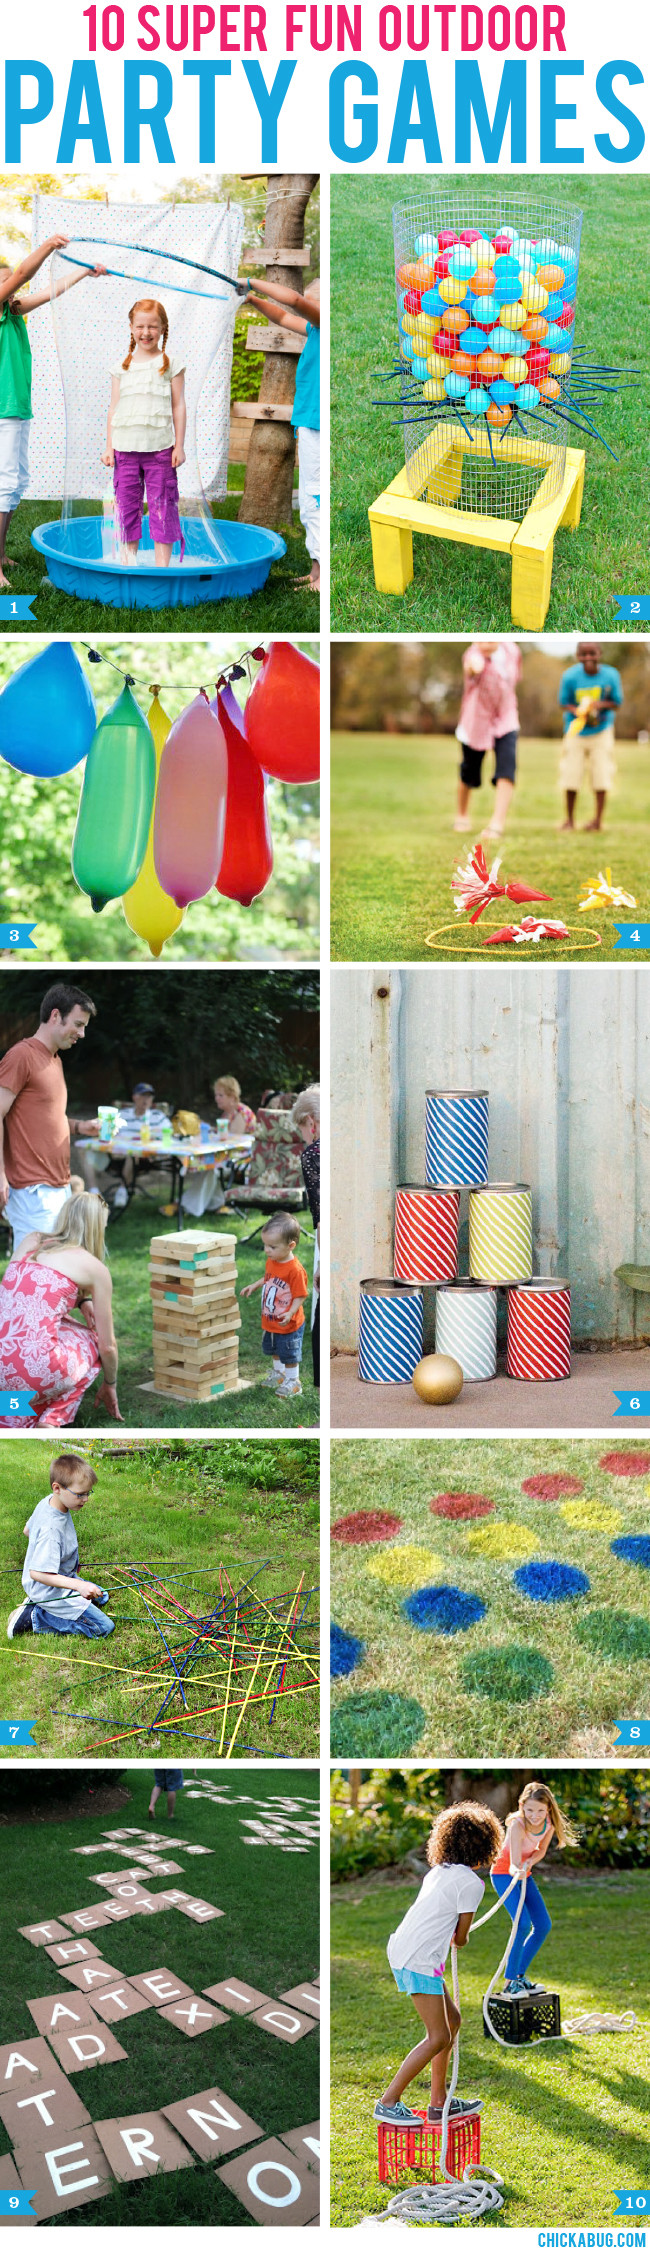 Kids Party Games
 10 super fun outdoor party games